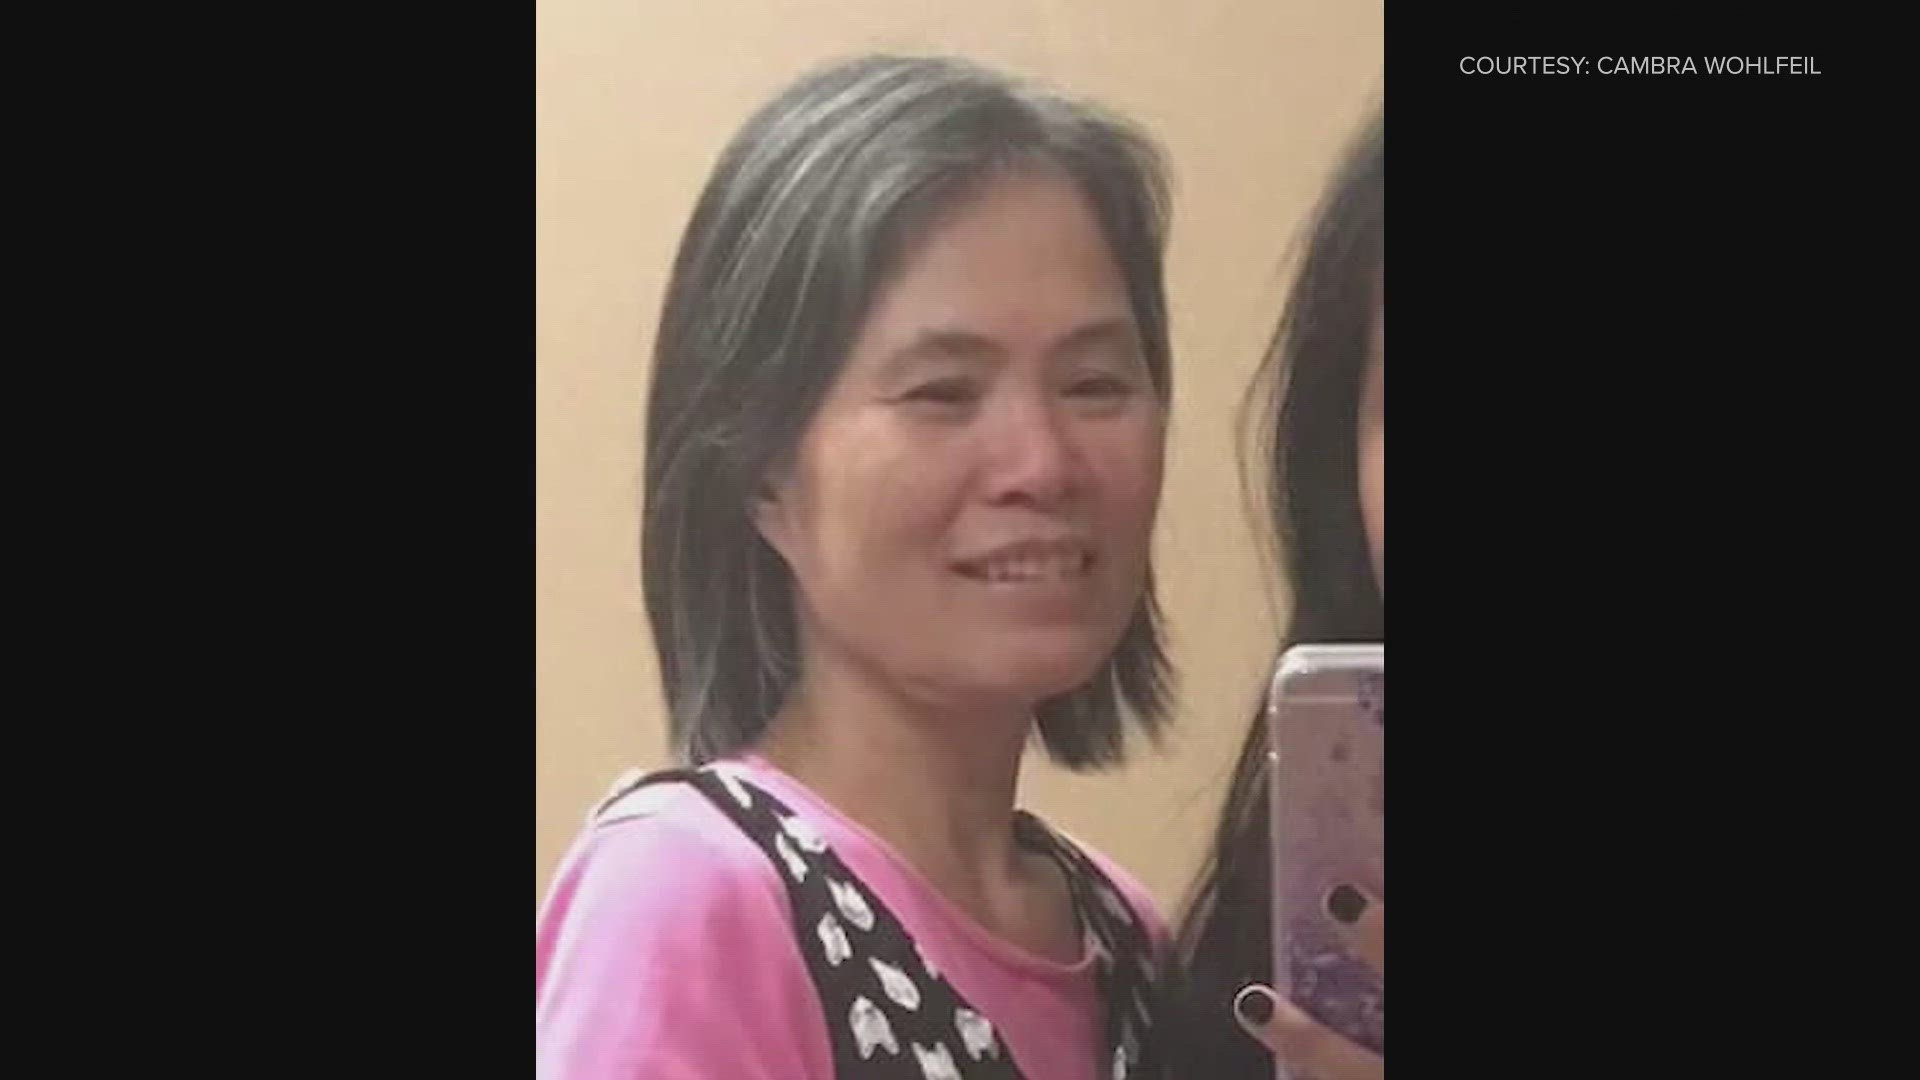 Jane Tang's family said she was planning to go for a hike on Saturday and hasn't been seen since.